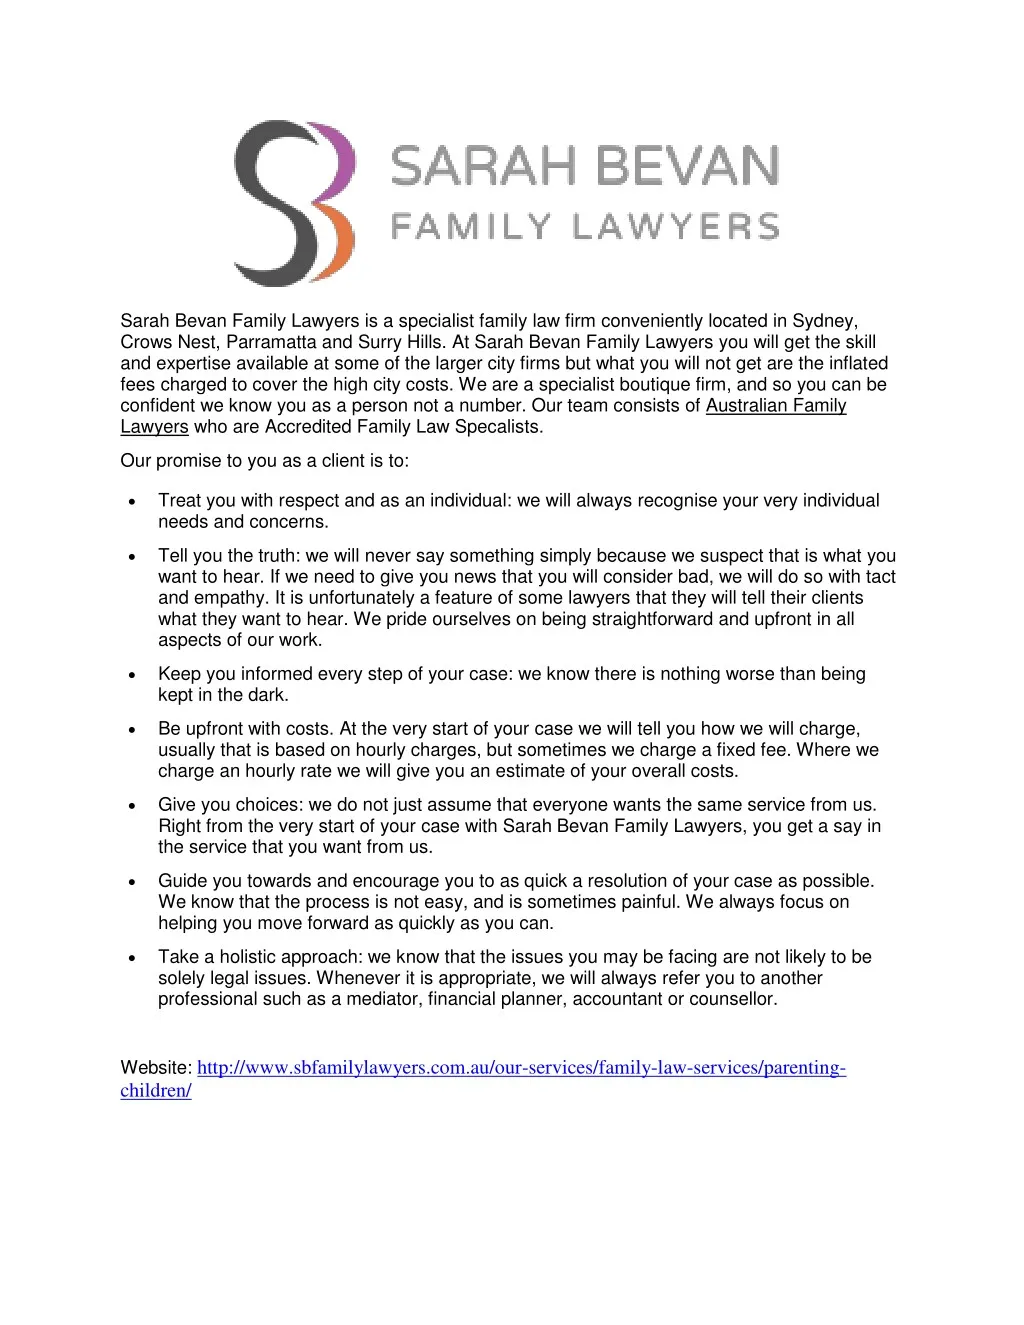 sarah bevan family lawyers is a specialist family